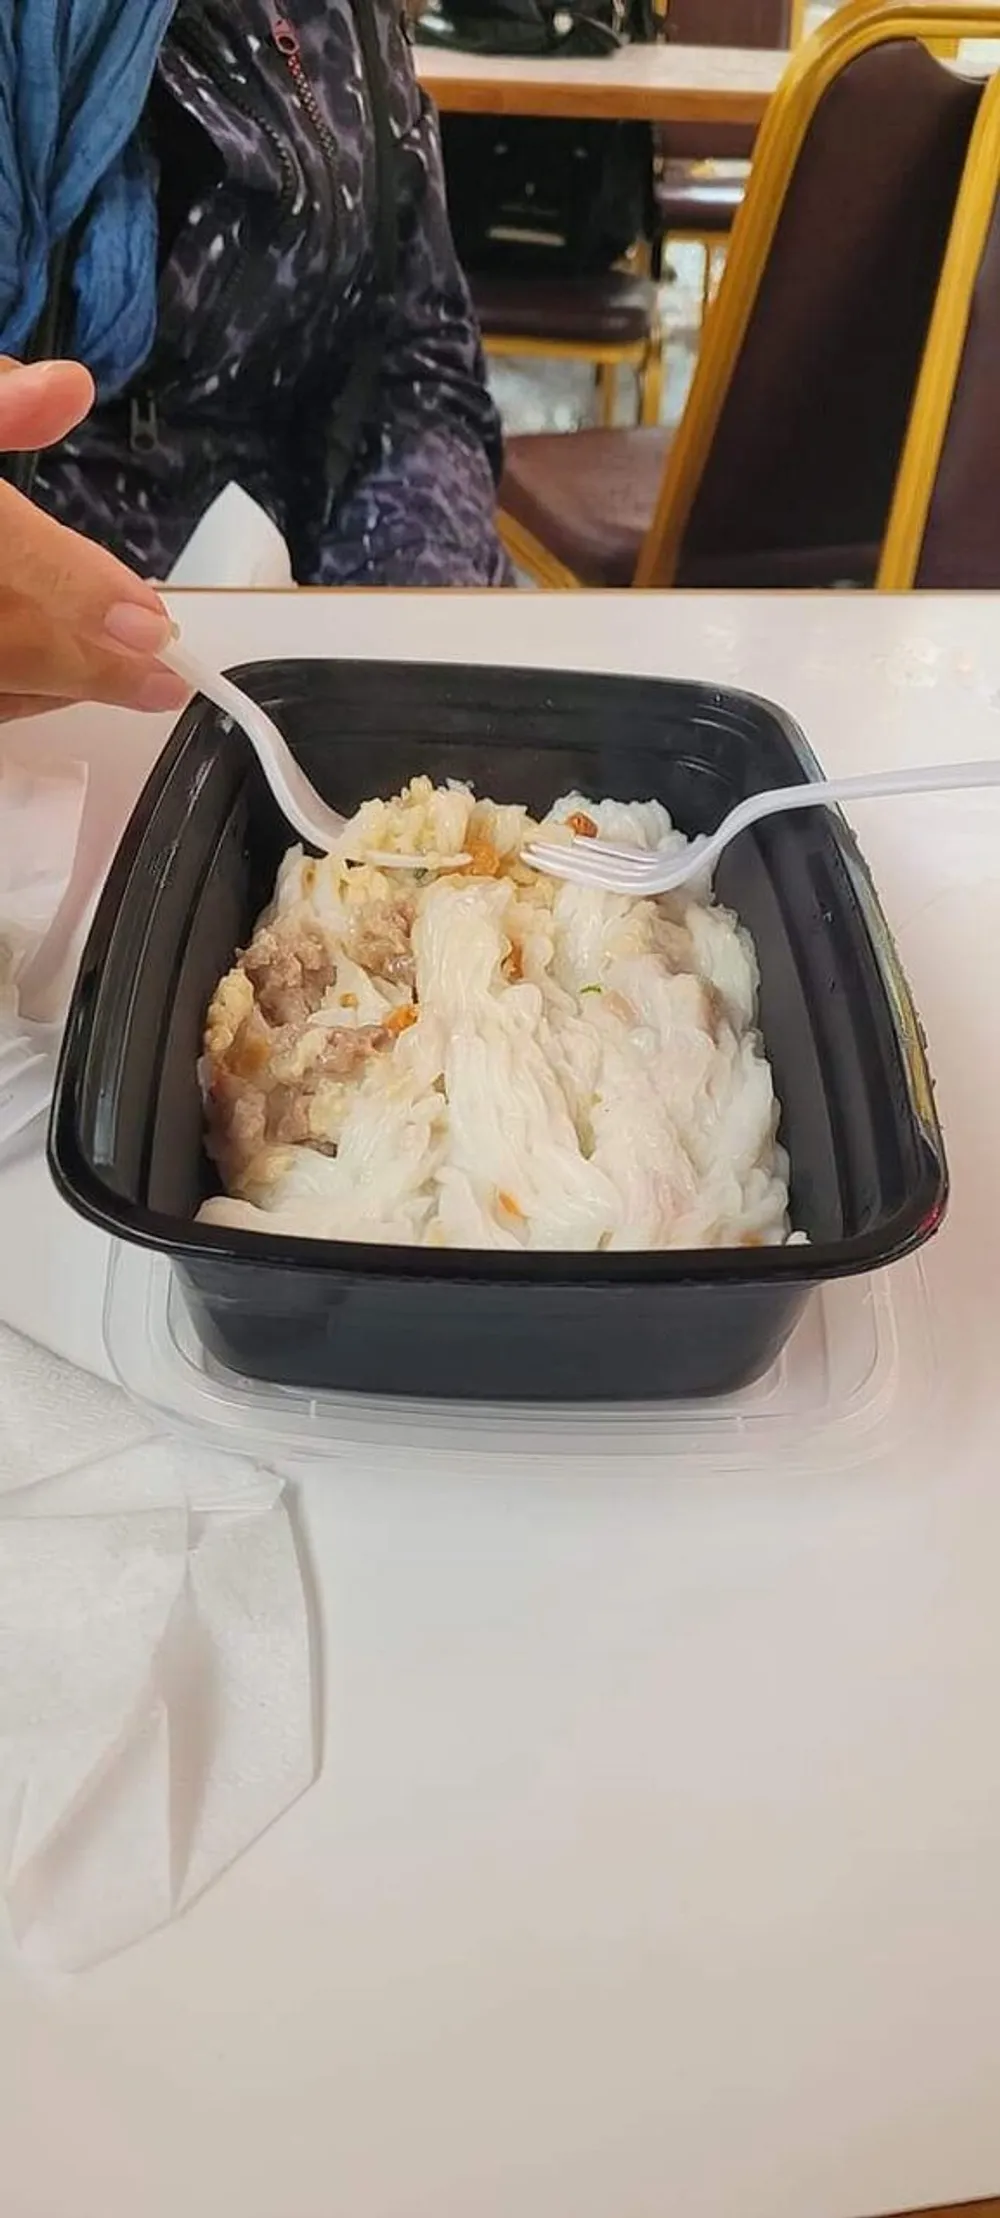 A person is about to eat a meal of rice and what appears to be chicken from a black plastic takeout container using a white plastic fork